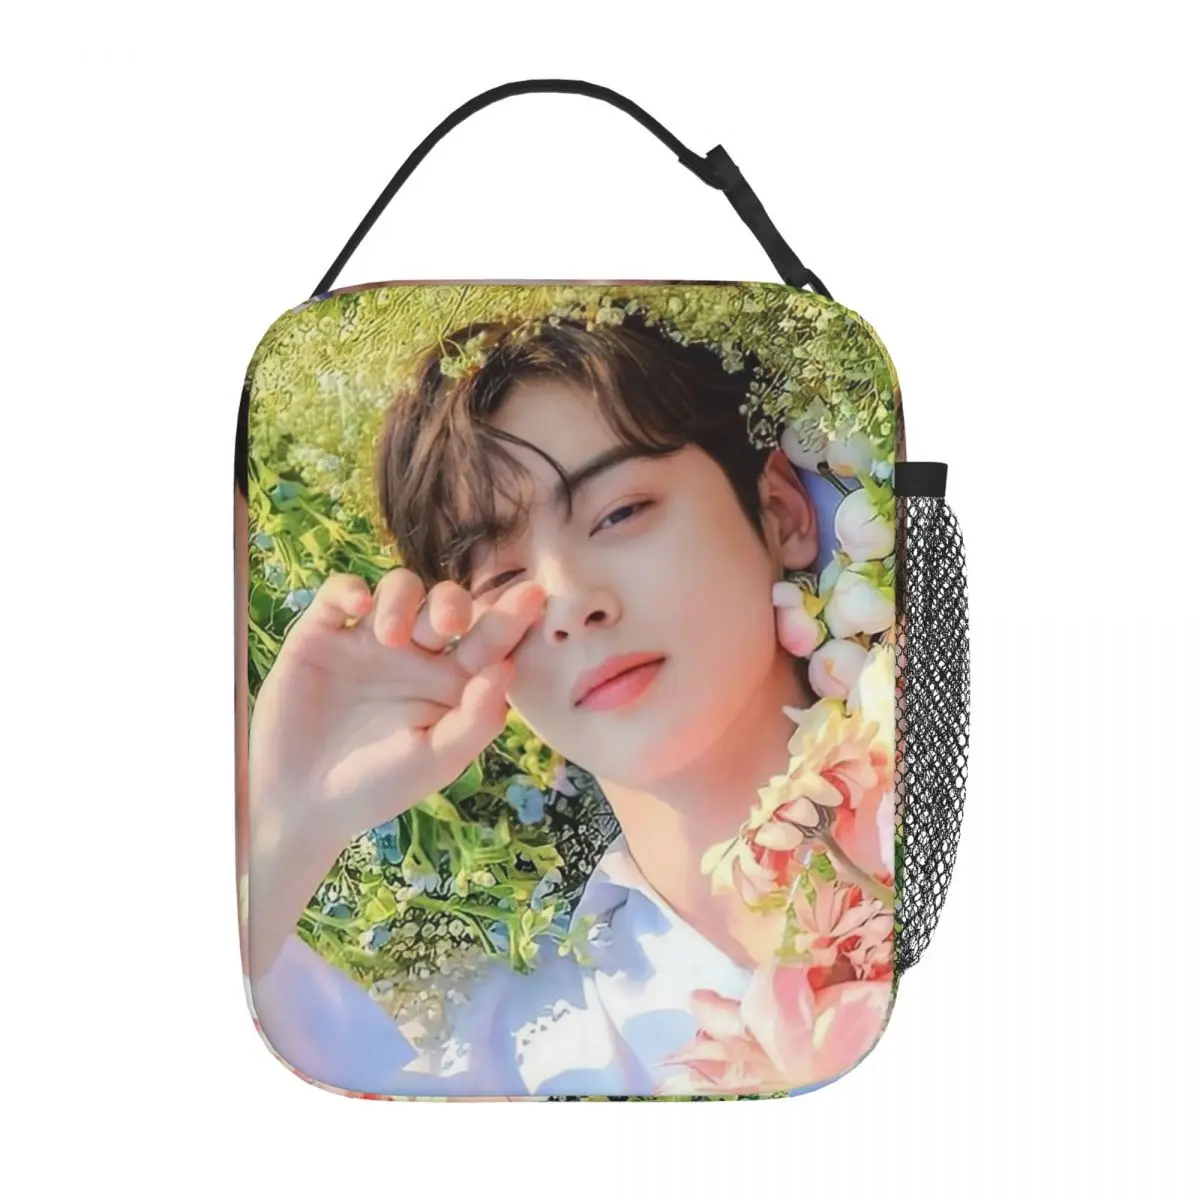 

Idol Cha Eun Woo Thermal Insulated Lunch Bag for School ASTRO Portable Bento Box Thermal Cooler Food Box